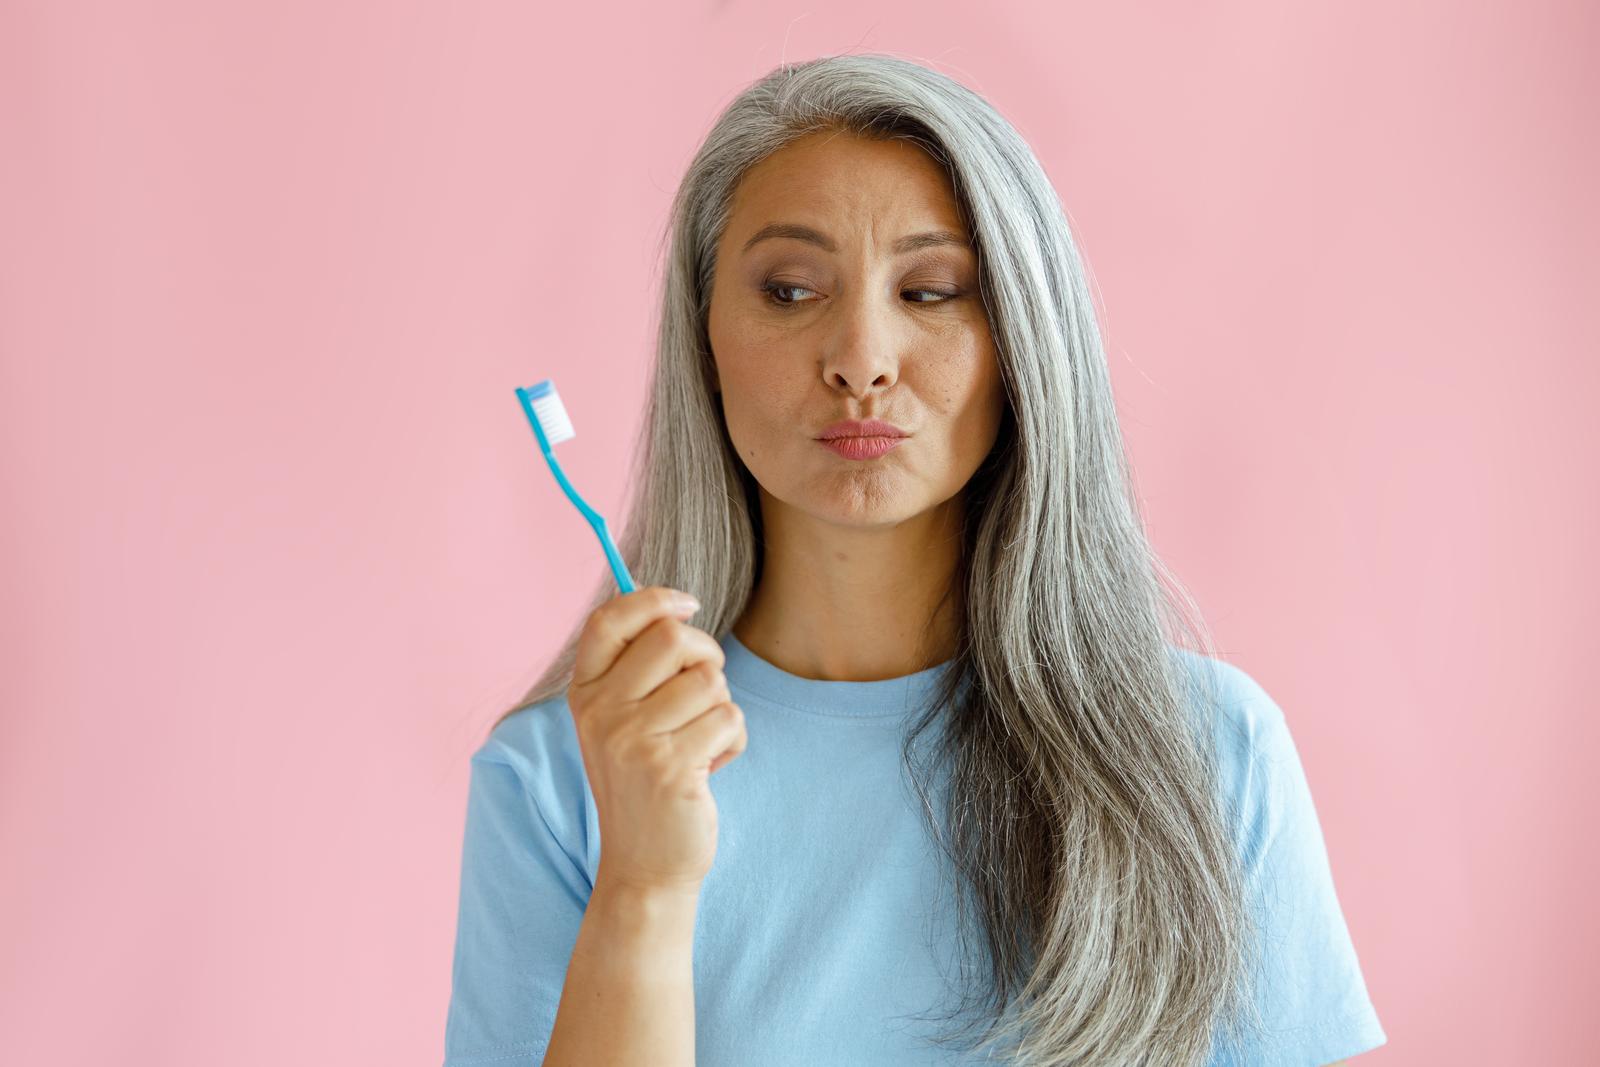 Toothbrush Cover: Friend Or Foe? Tips For Keeping Your Toothbrush Clean